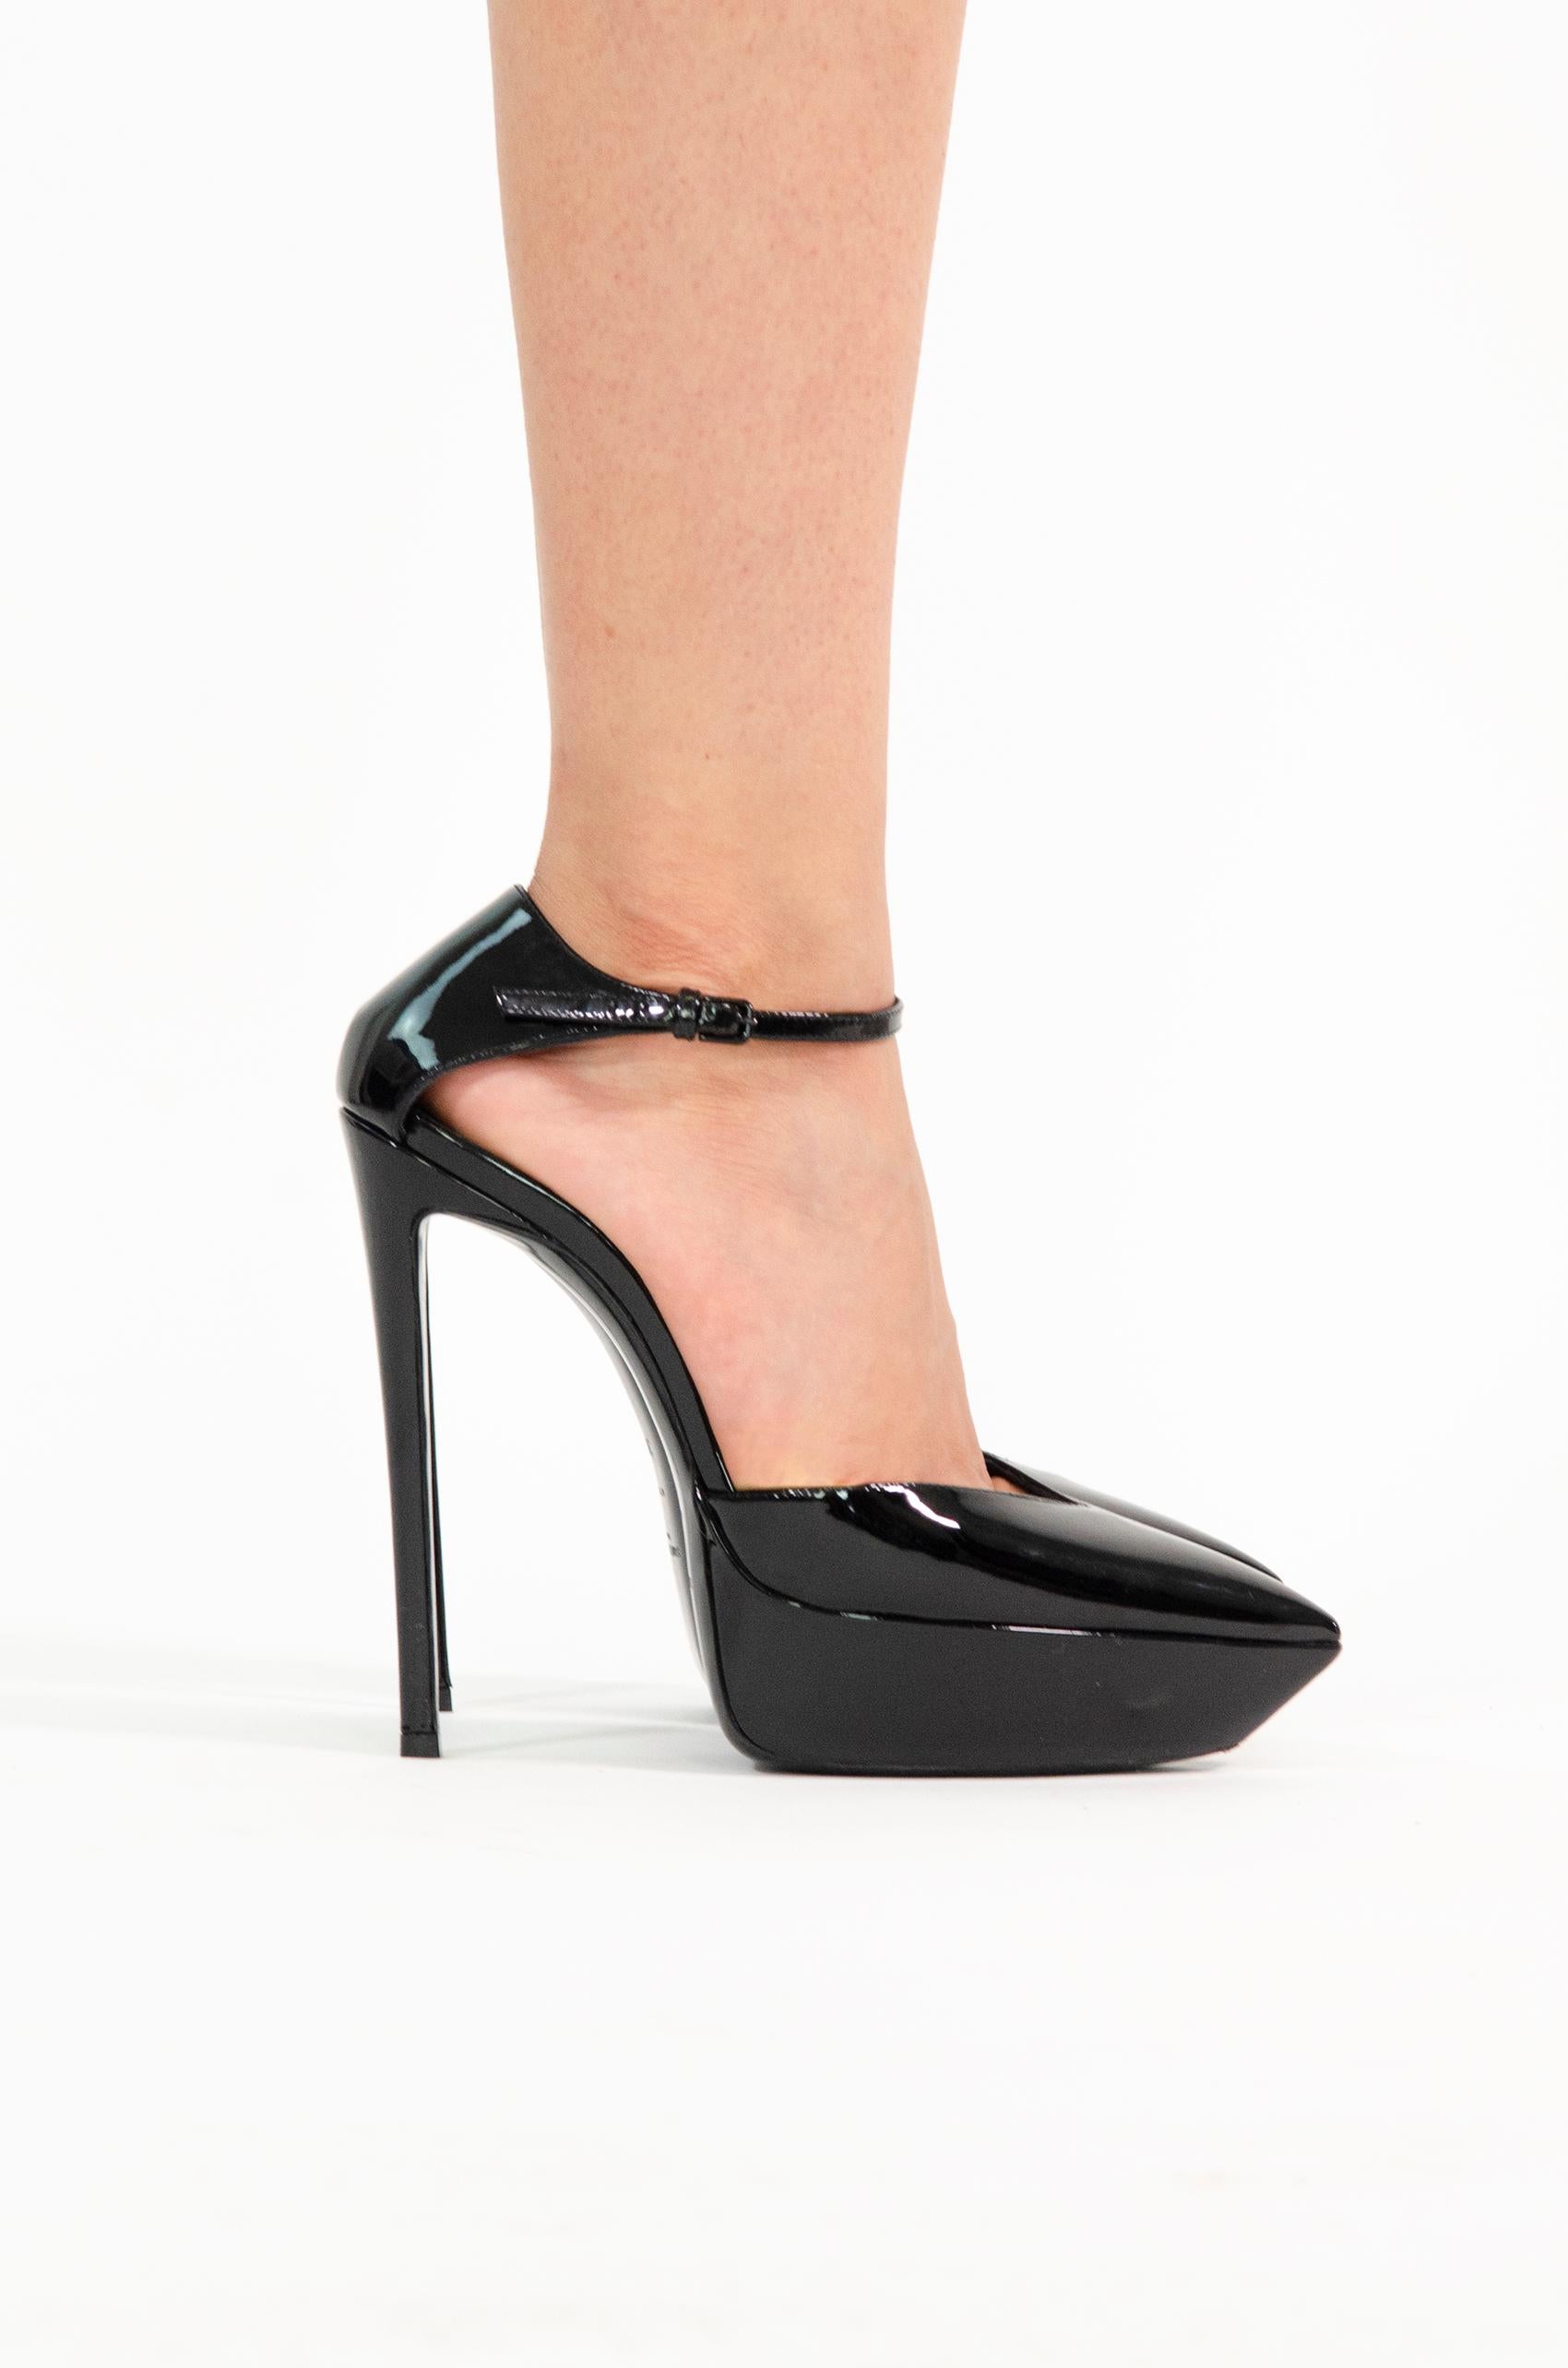 Incredible rare patent killer heels by Saint Laurent from F/W 2019 <3

These black patent pumps are sculpted beautifully and made out of a high-gloss patent leather. They feature a pointed toe, a buckled ankle-wrap strap and a 14cm heel. Style them